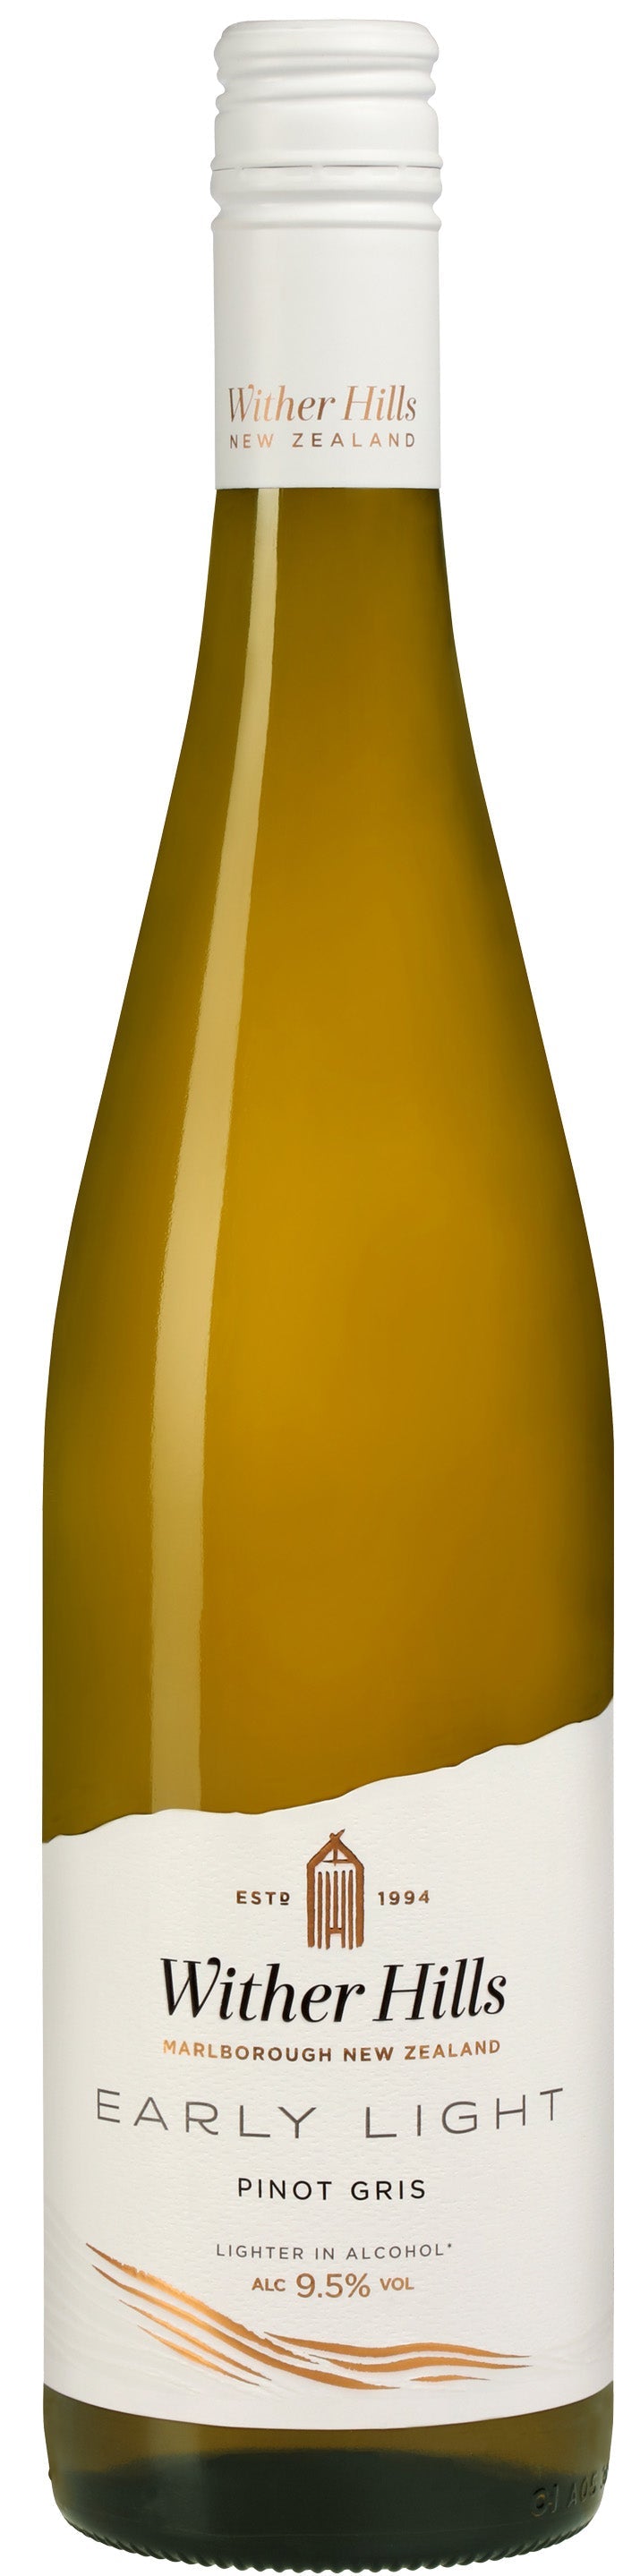 Wither Hills Early Light Pinot Gris